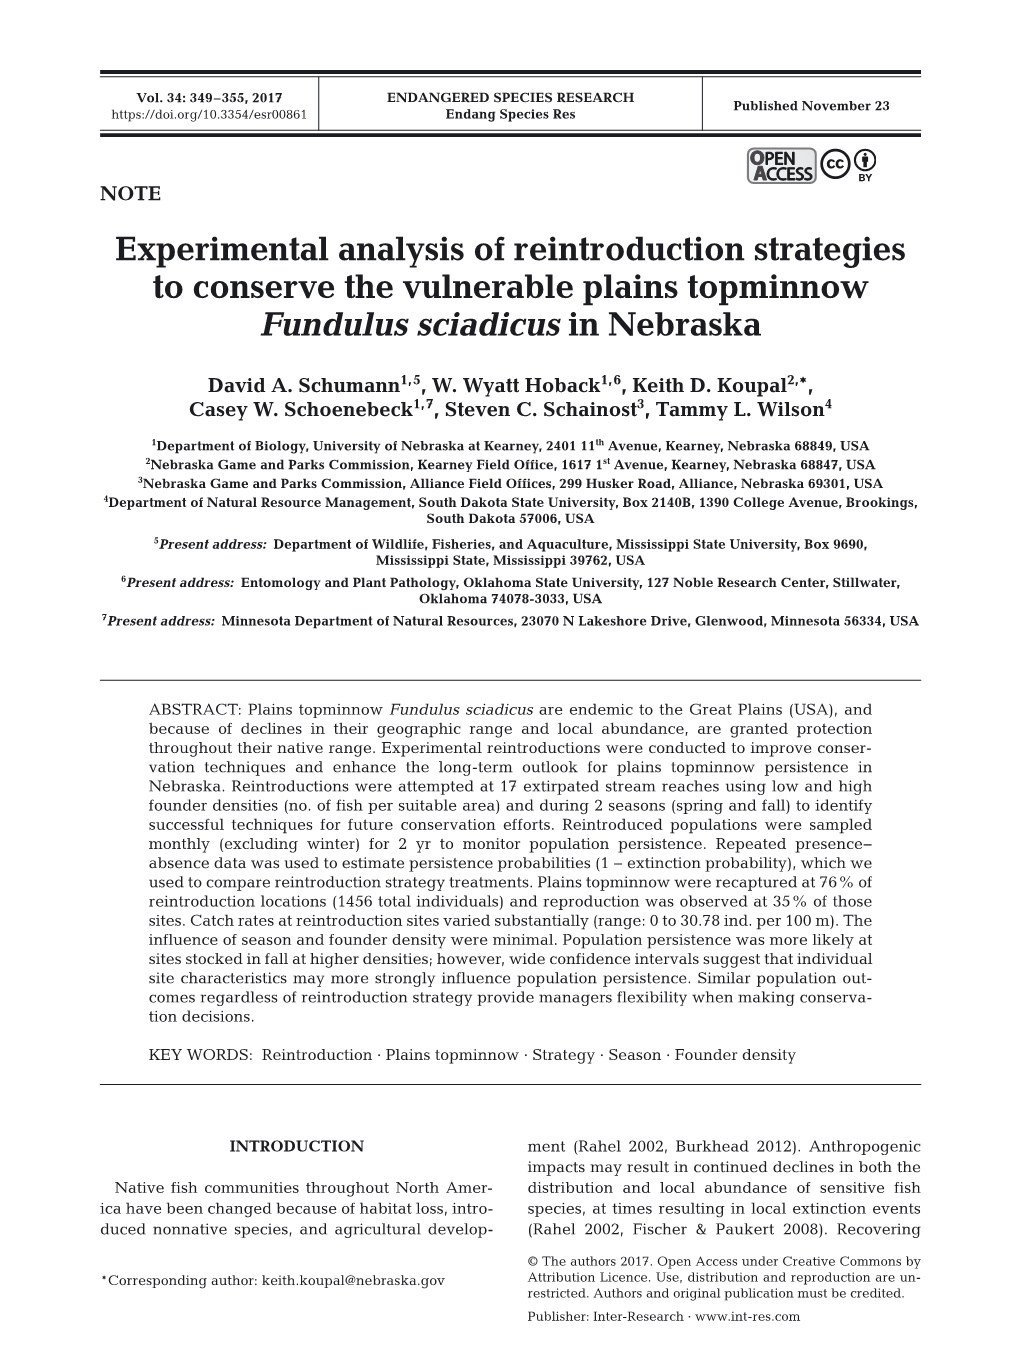 Experimental Analysis of Reintroduction Strategies to Conserve the Vulnerable Plains Topminnow Fundulus Sciadicus in Nebraska